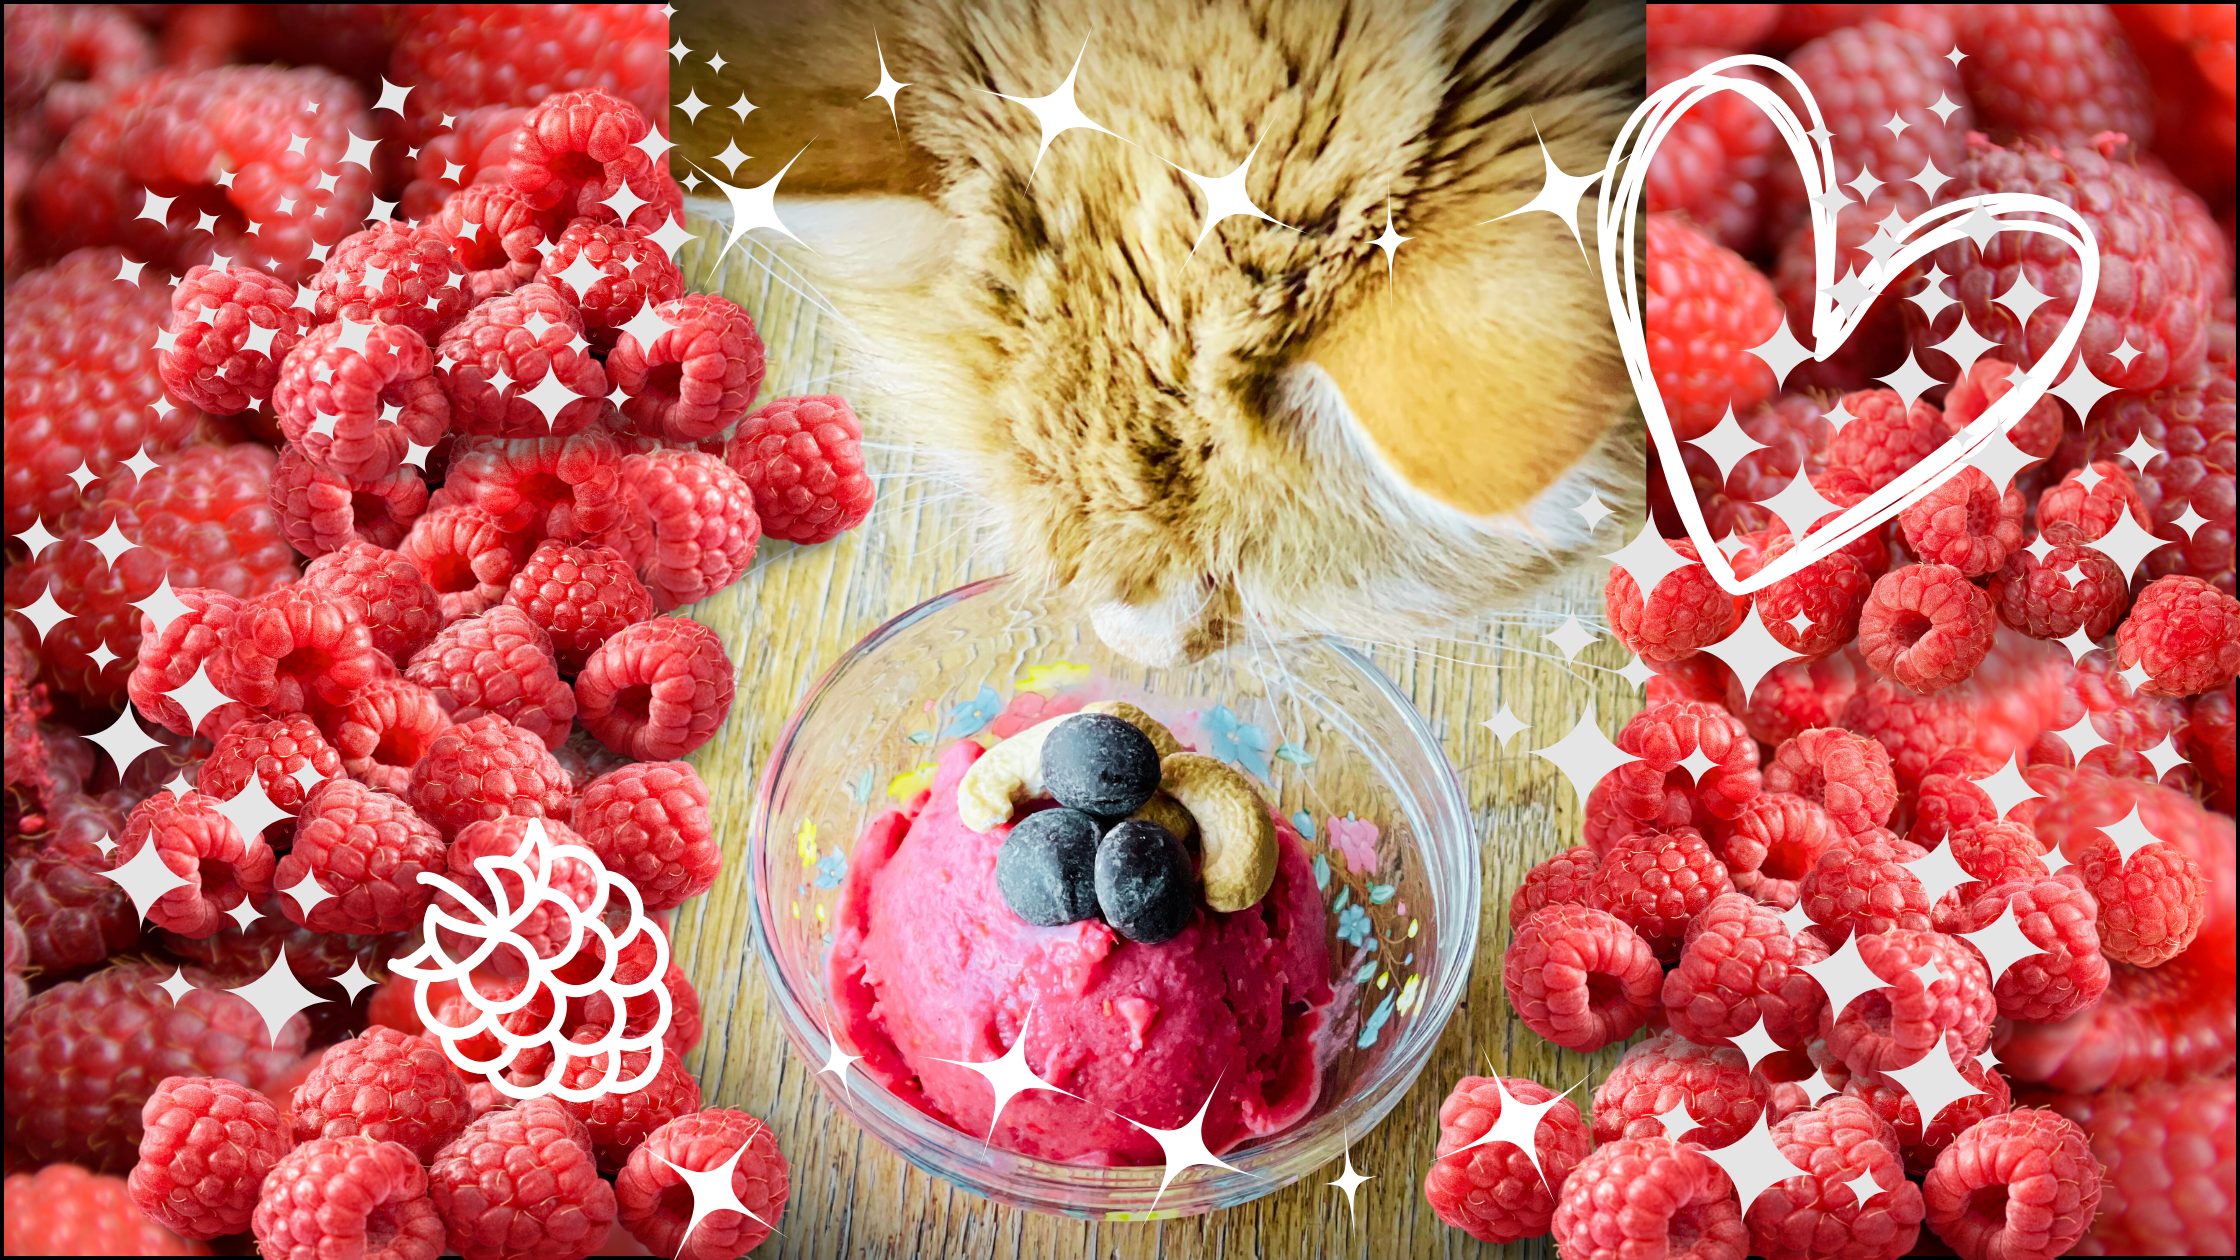 An image of a cute cat checking out some fresh made raspberry ice cream. They are surrounded by heaps of raspberries, a heart, and sparkles.